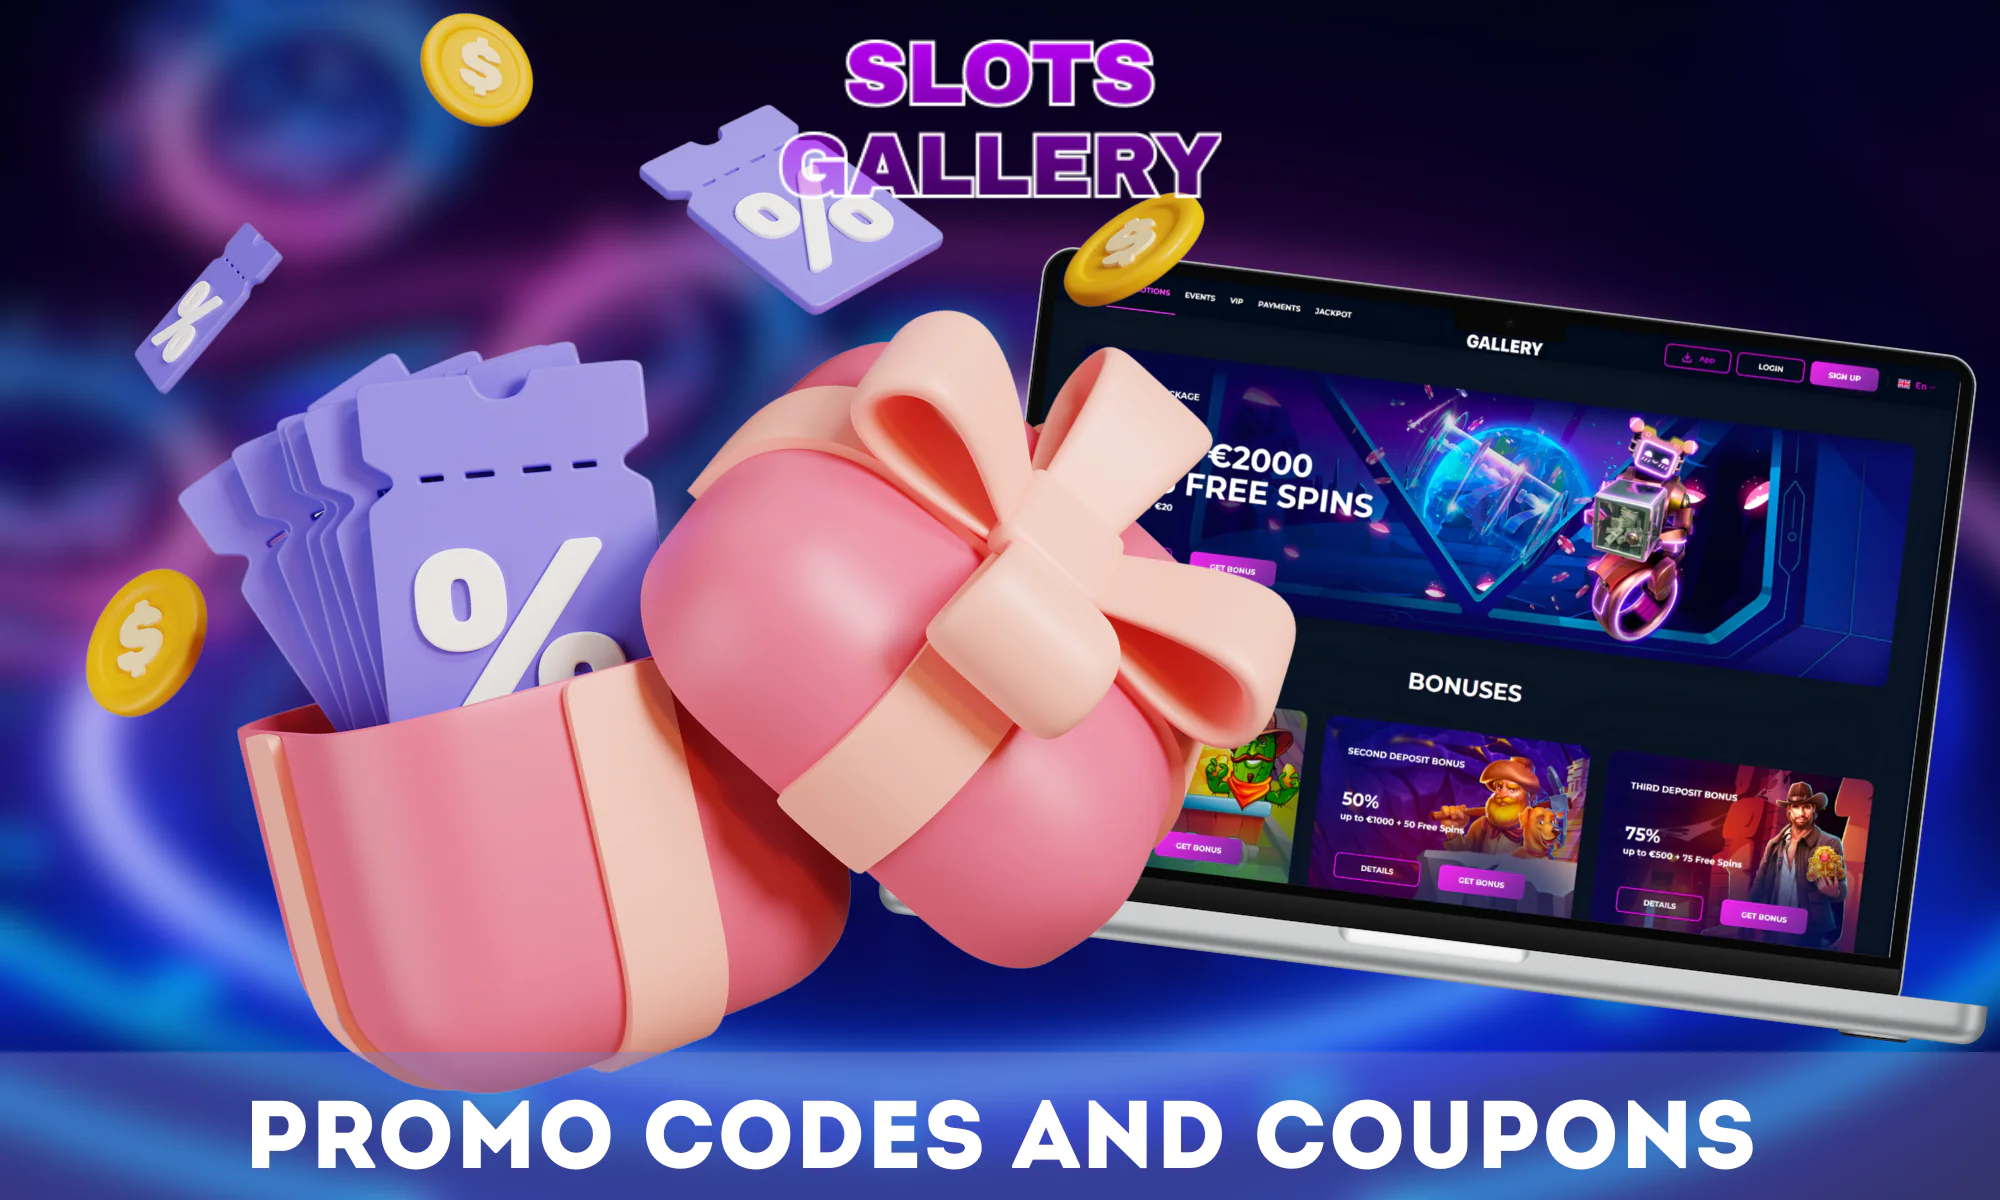 Slots Gallery allows you to use promo codes to get instant bonuses